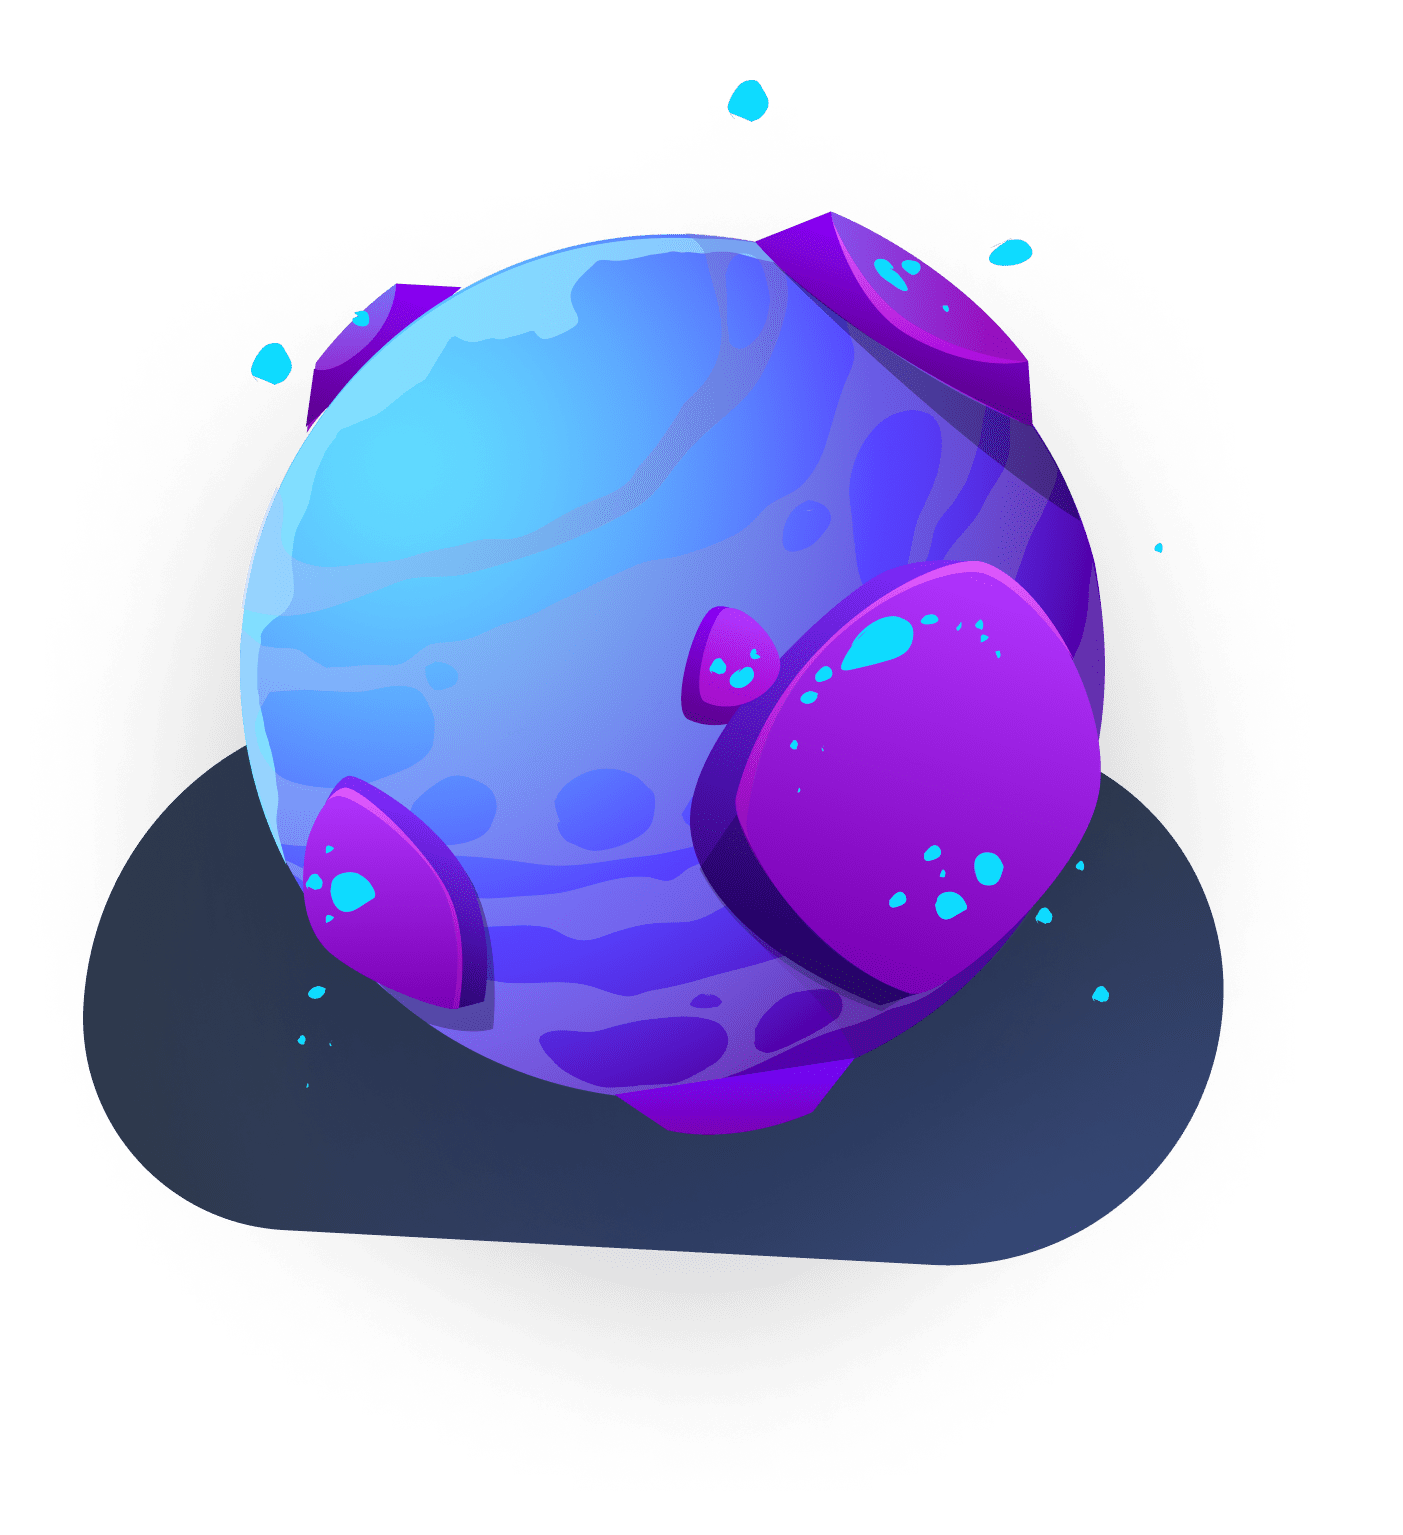 a fantasy globe of bright blue, pink and purple lands and shades